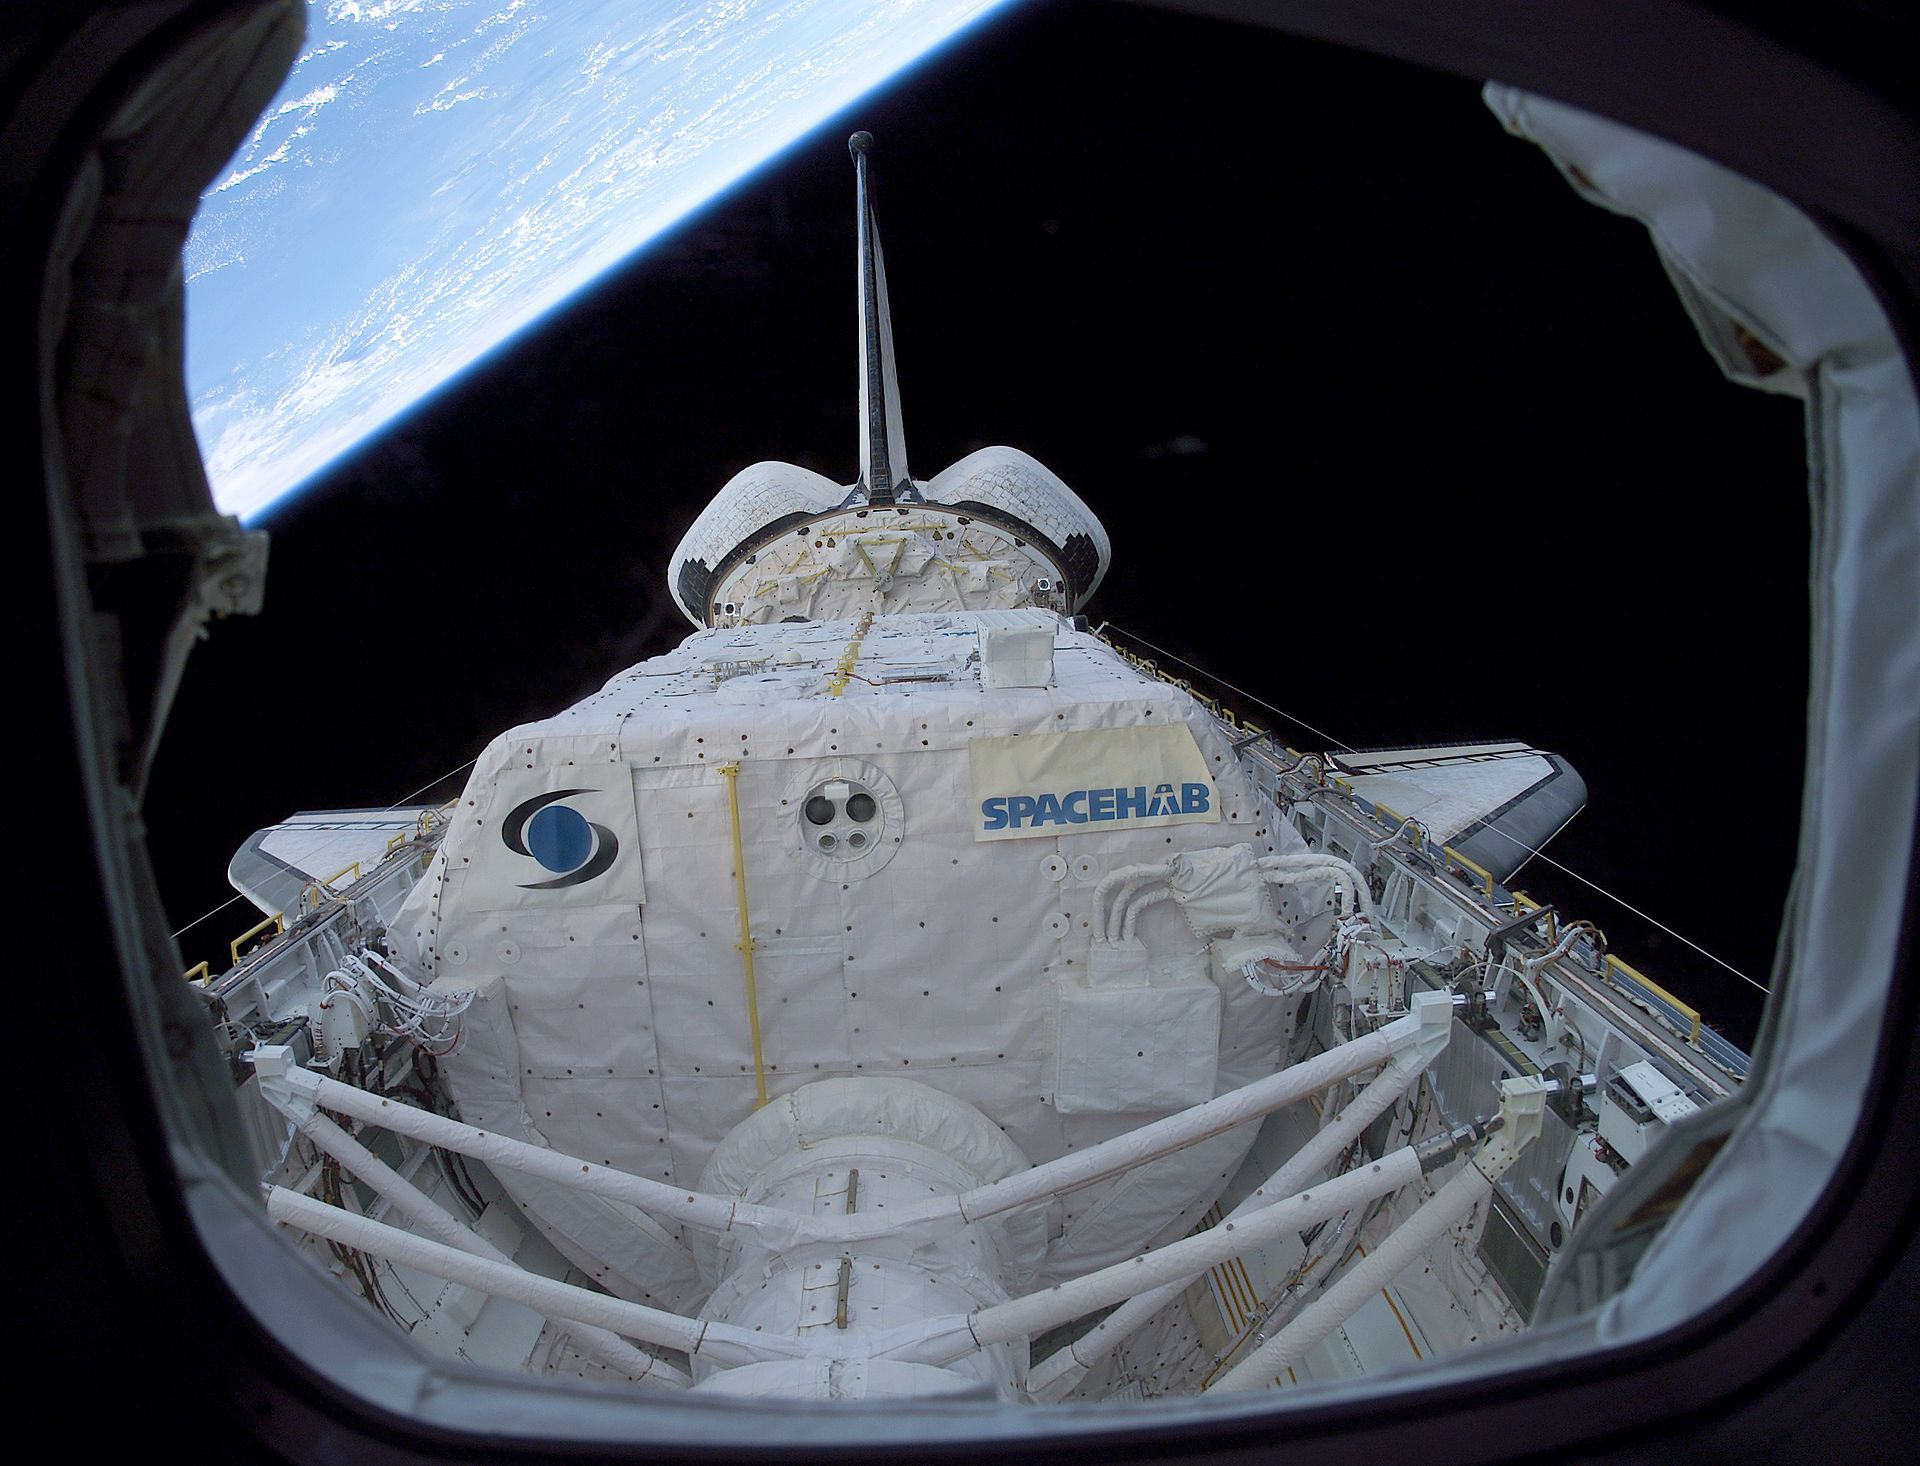 Image from Space Shuttle showing SpaceHab logo from space
Photo: Nasa